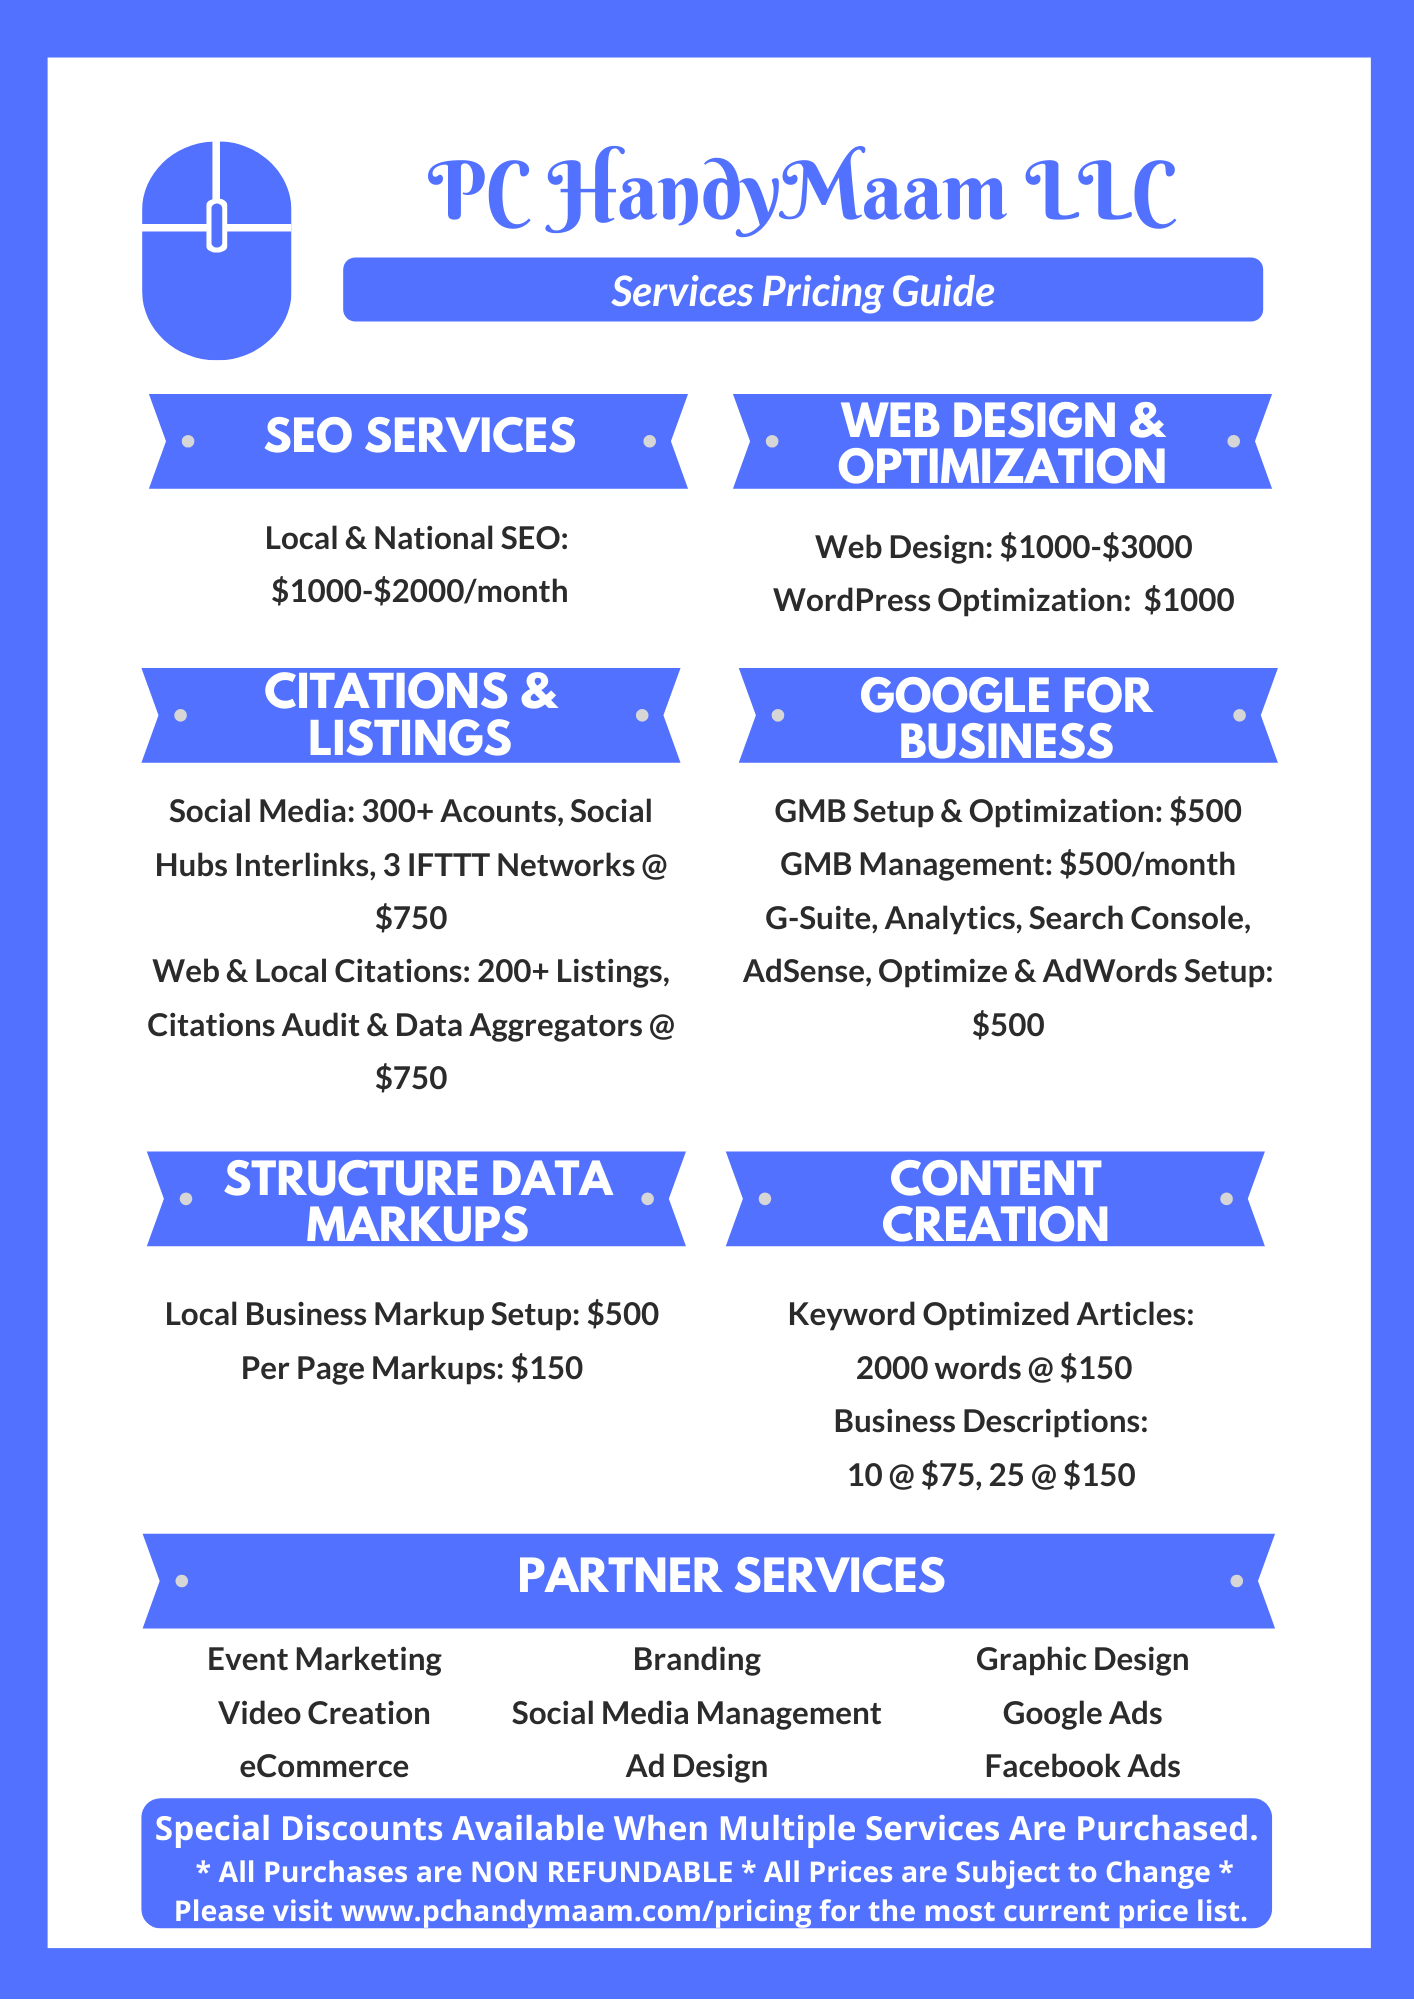 Pricing Guides for PC HandyMaam Web Design & SEO Services